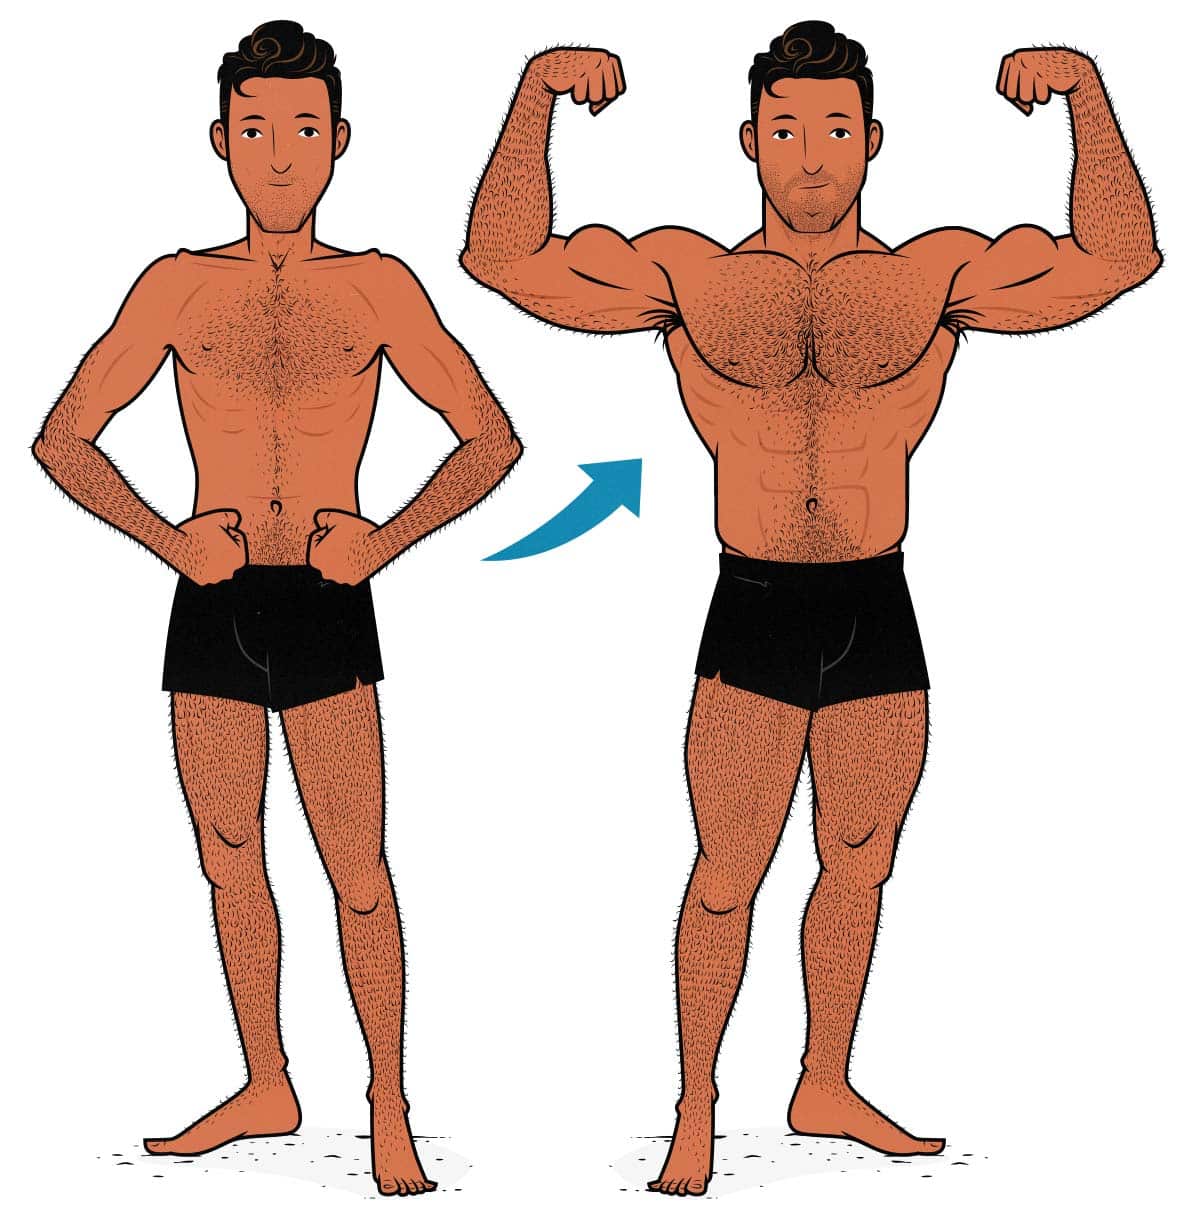 Illustration of a skinny guy building muscle and becoming muscular.